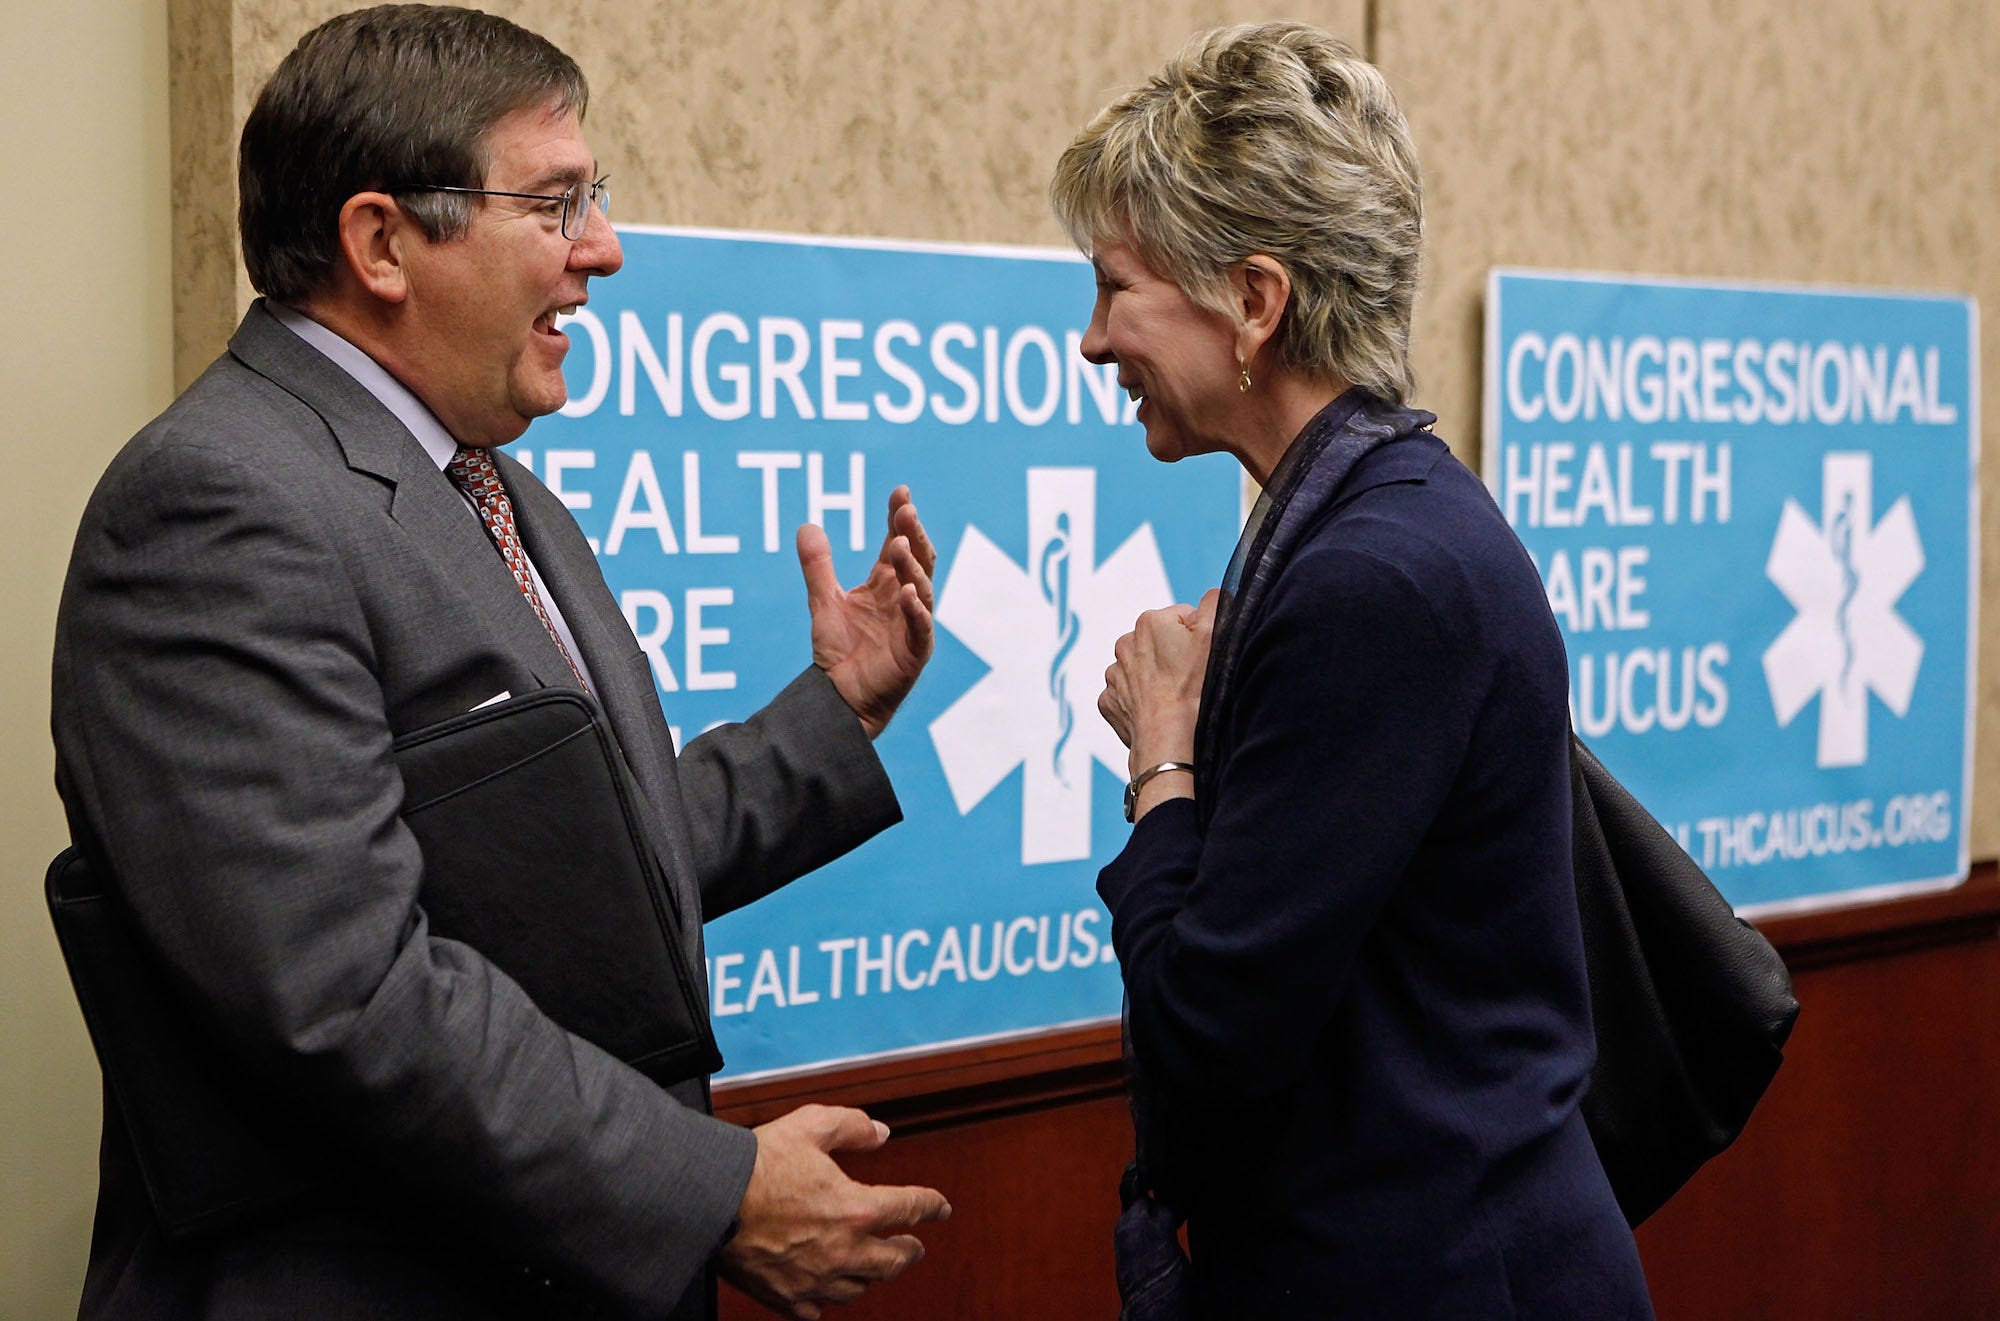 Rep. Michael Burgess, a Republican of Texas, smiles and gestures while greeting America's Health Insurance Plans President and CEO Karen Ignagni during a policy meeting on Capitol Hill.